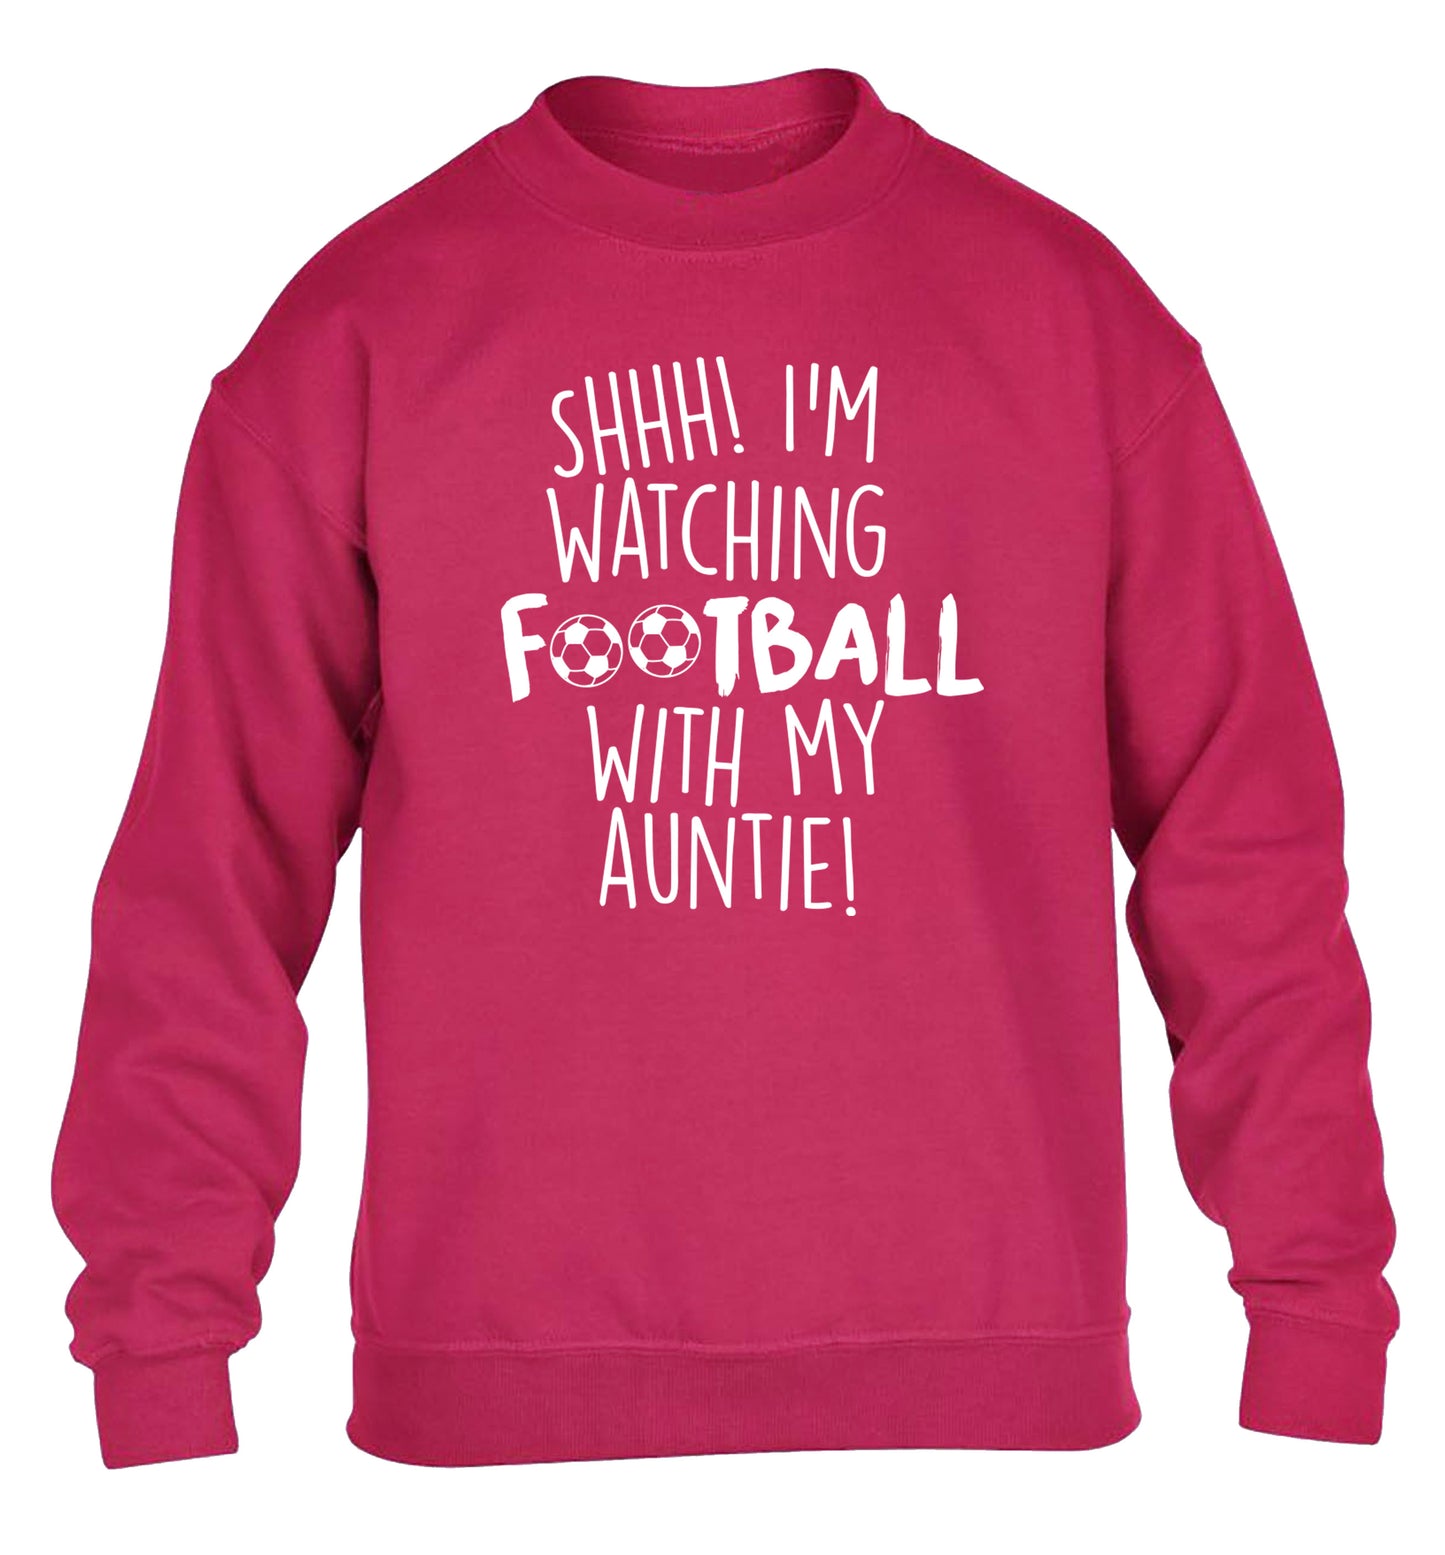 Shhh I'm watching football with my auntie children's pink sweater 12-14 Years